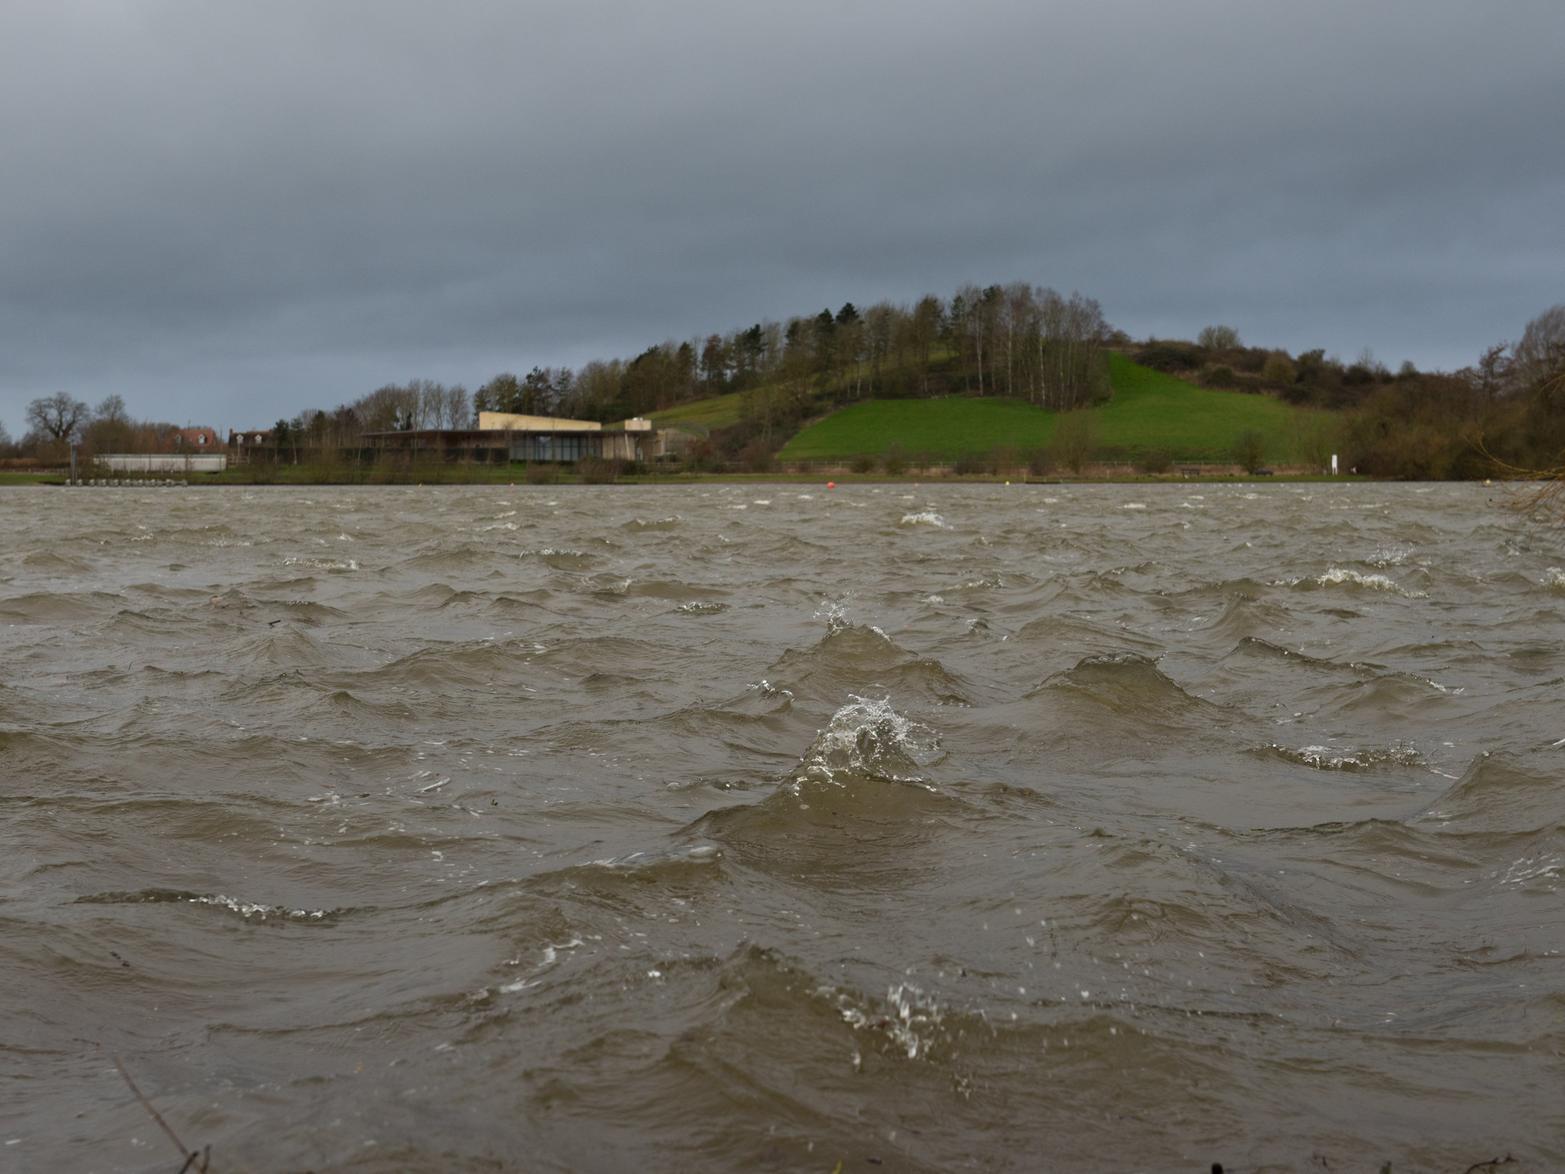 It didn't look like ideal conditions for sailing on Watermead Lake